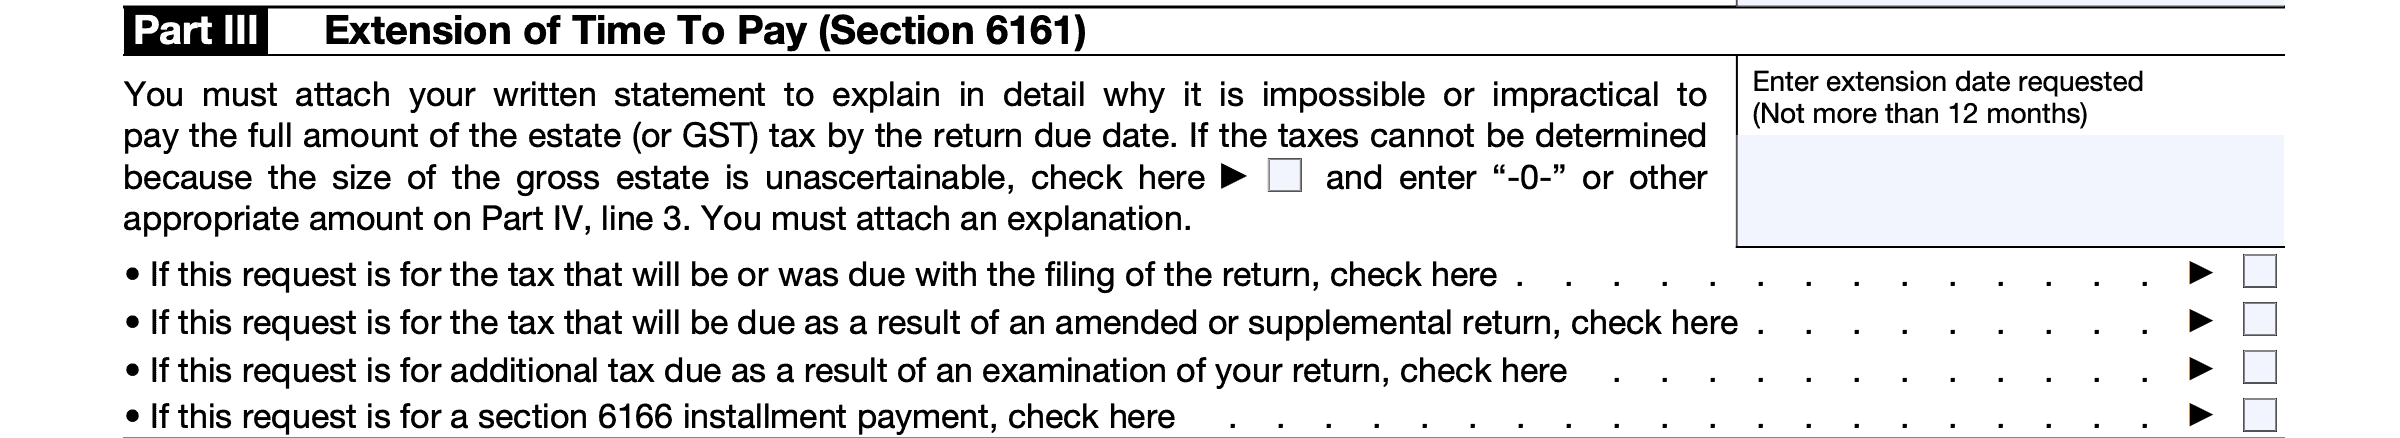 irs form 4768, part III, extension of time to pay